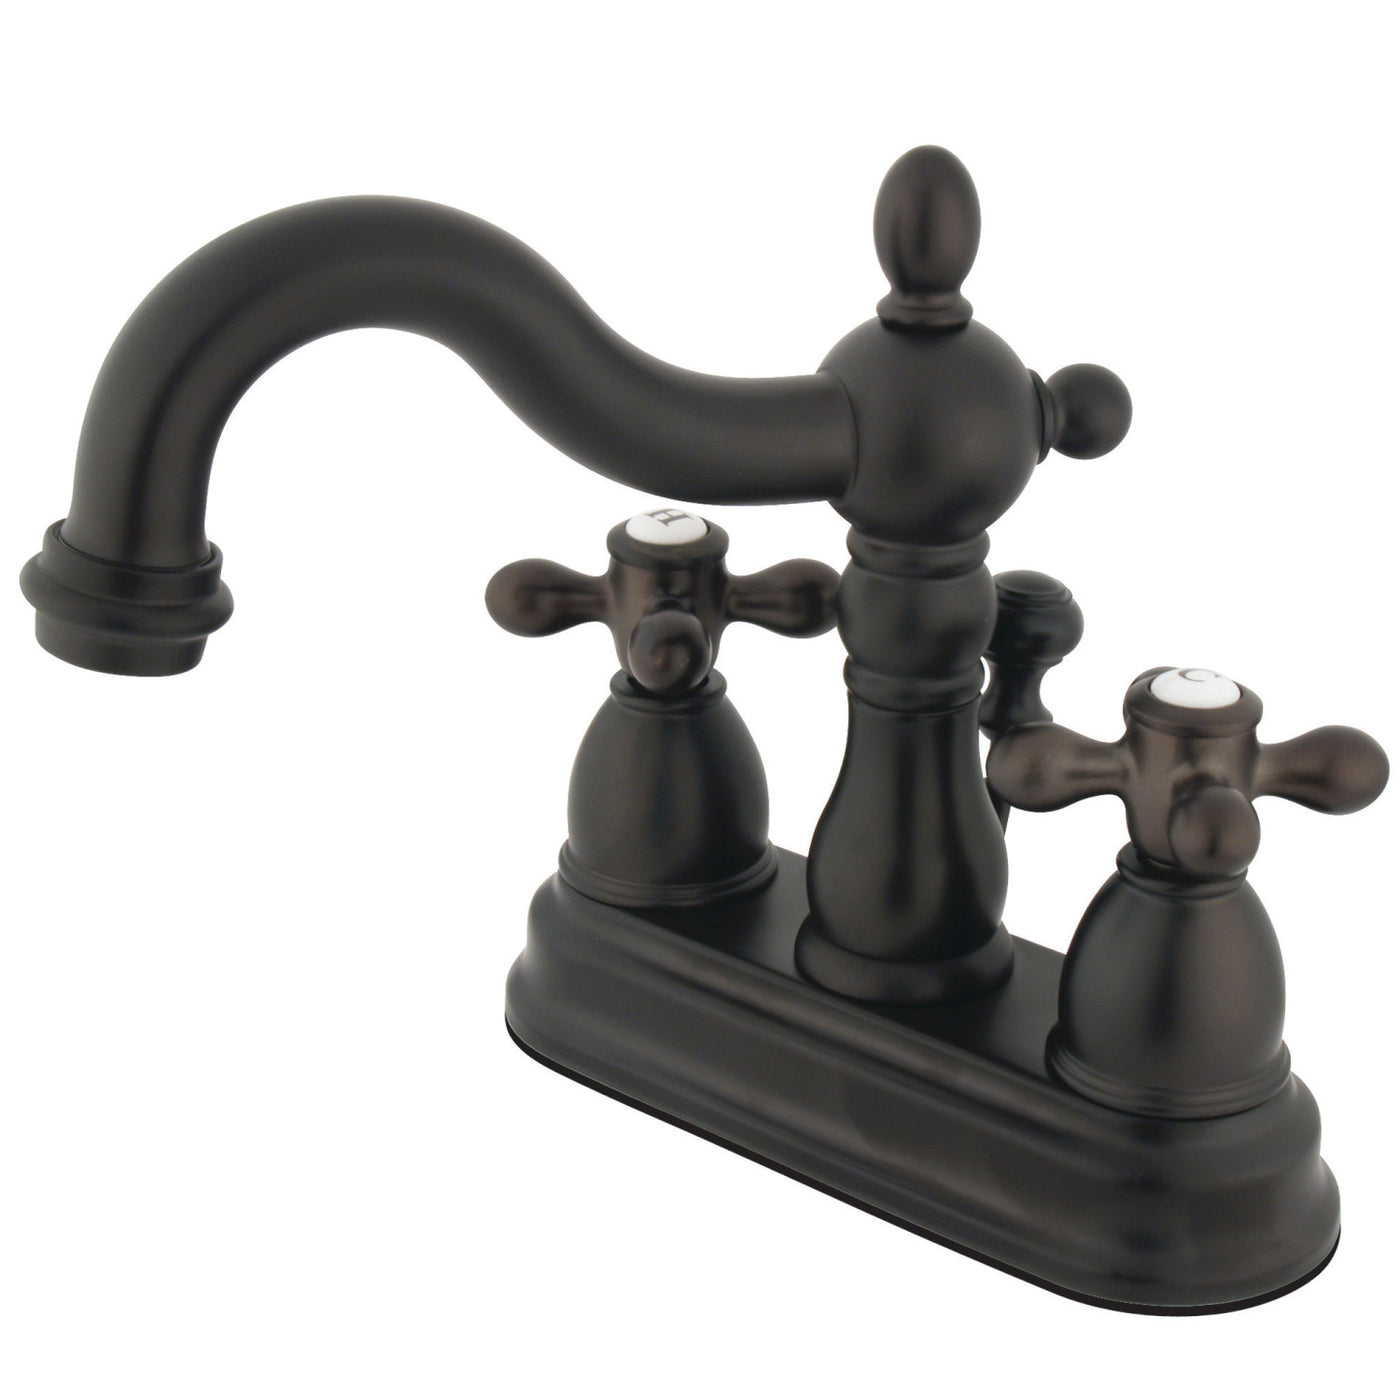 Elements of Design EB1605AX 4-Inch Centerset Bathroom Faucet with Plastic Pop-Up, Oil Rubbed Bronze